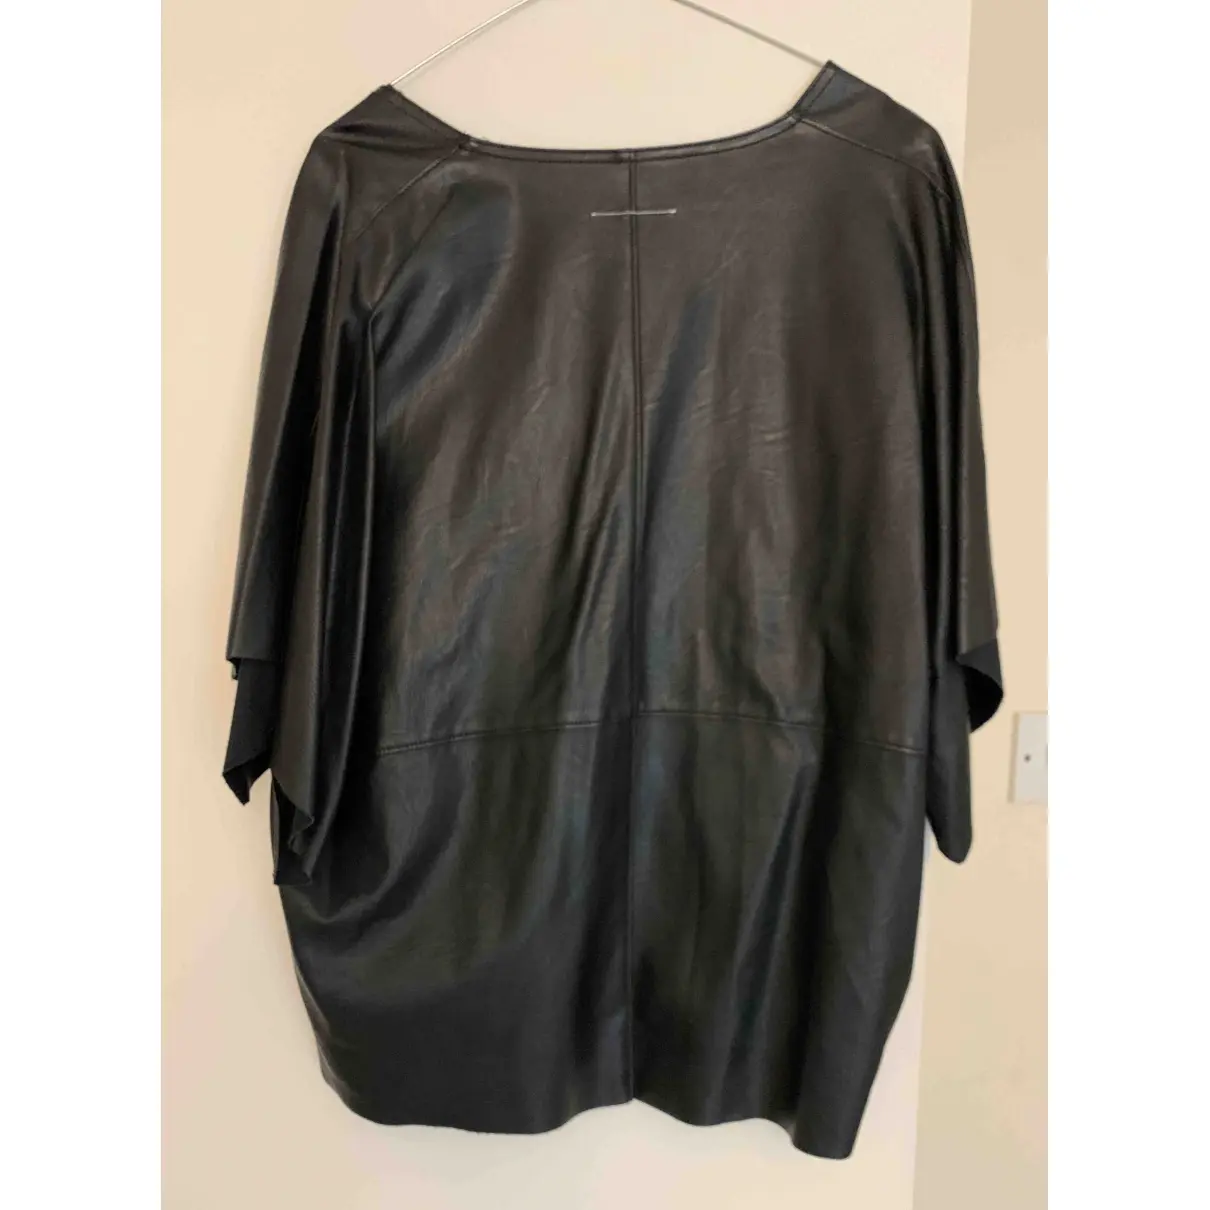 Buy MM6 Leather top online